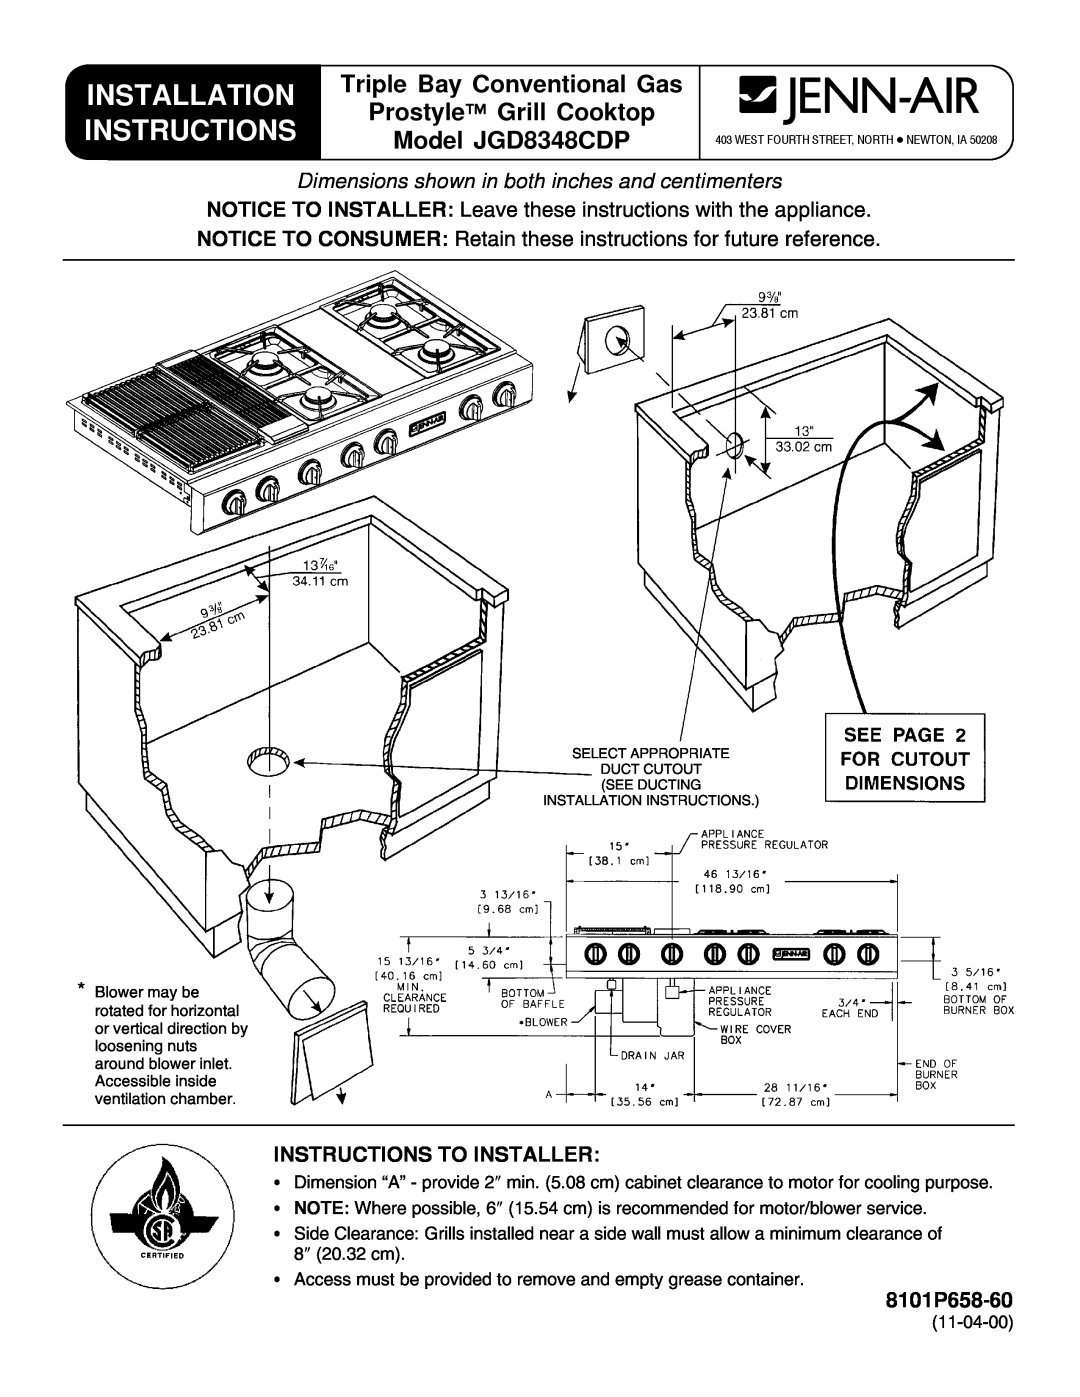 Jenn-Air installation instructions Triple Bay Conventional Gas, Prostyle Grill Cooktop, Model JGD8348CDP, 8101P658-60 